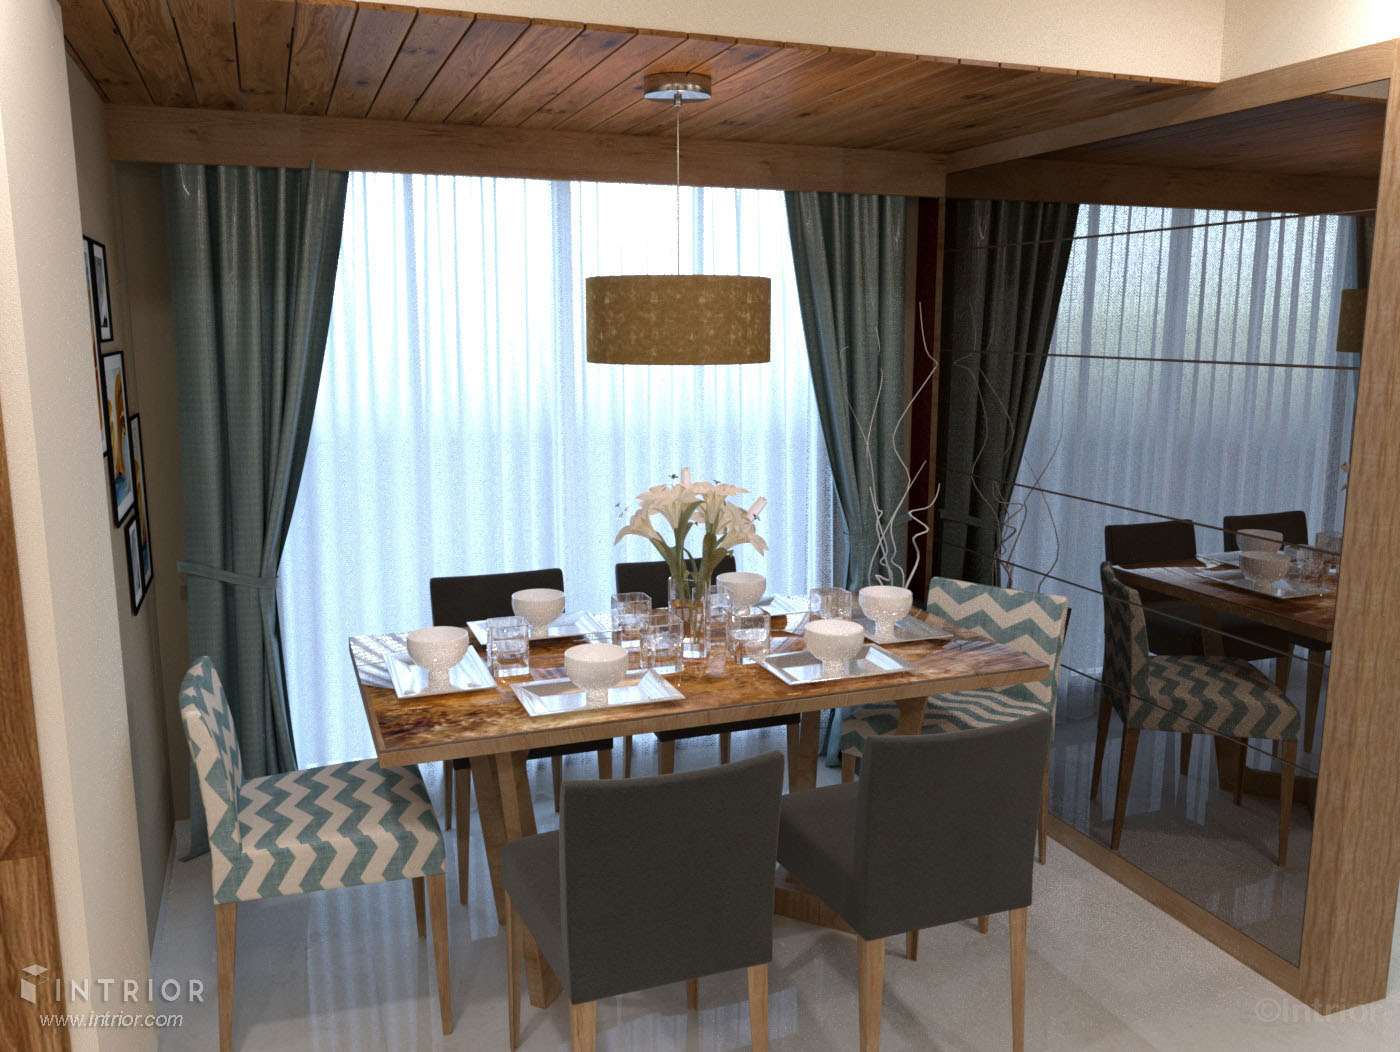 Living Room with Dining Table